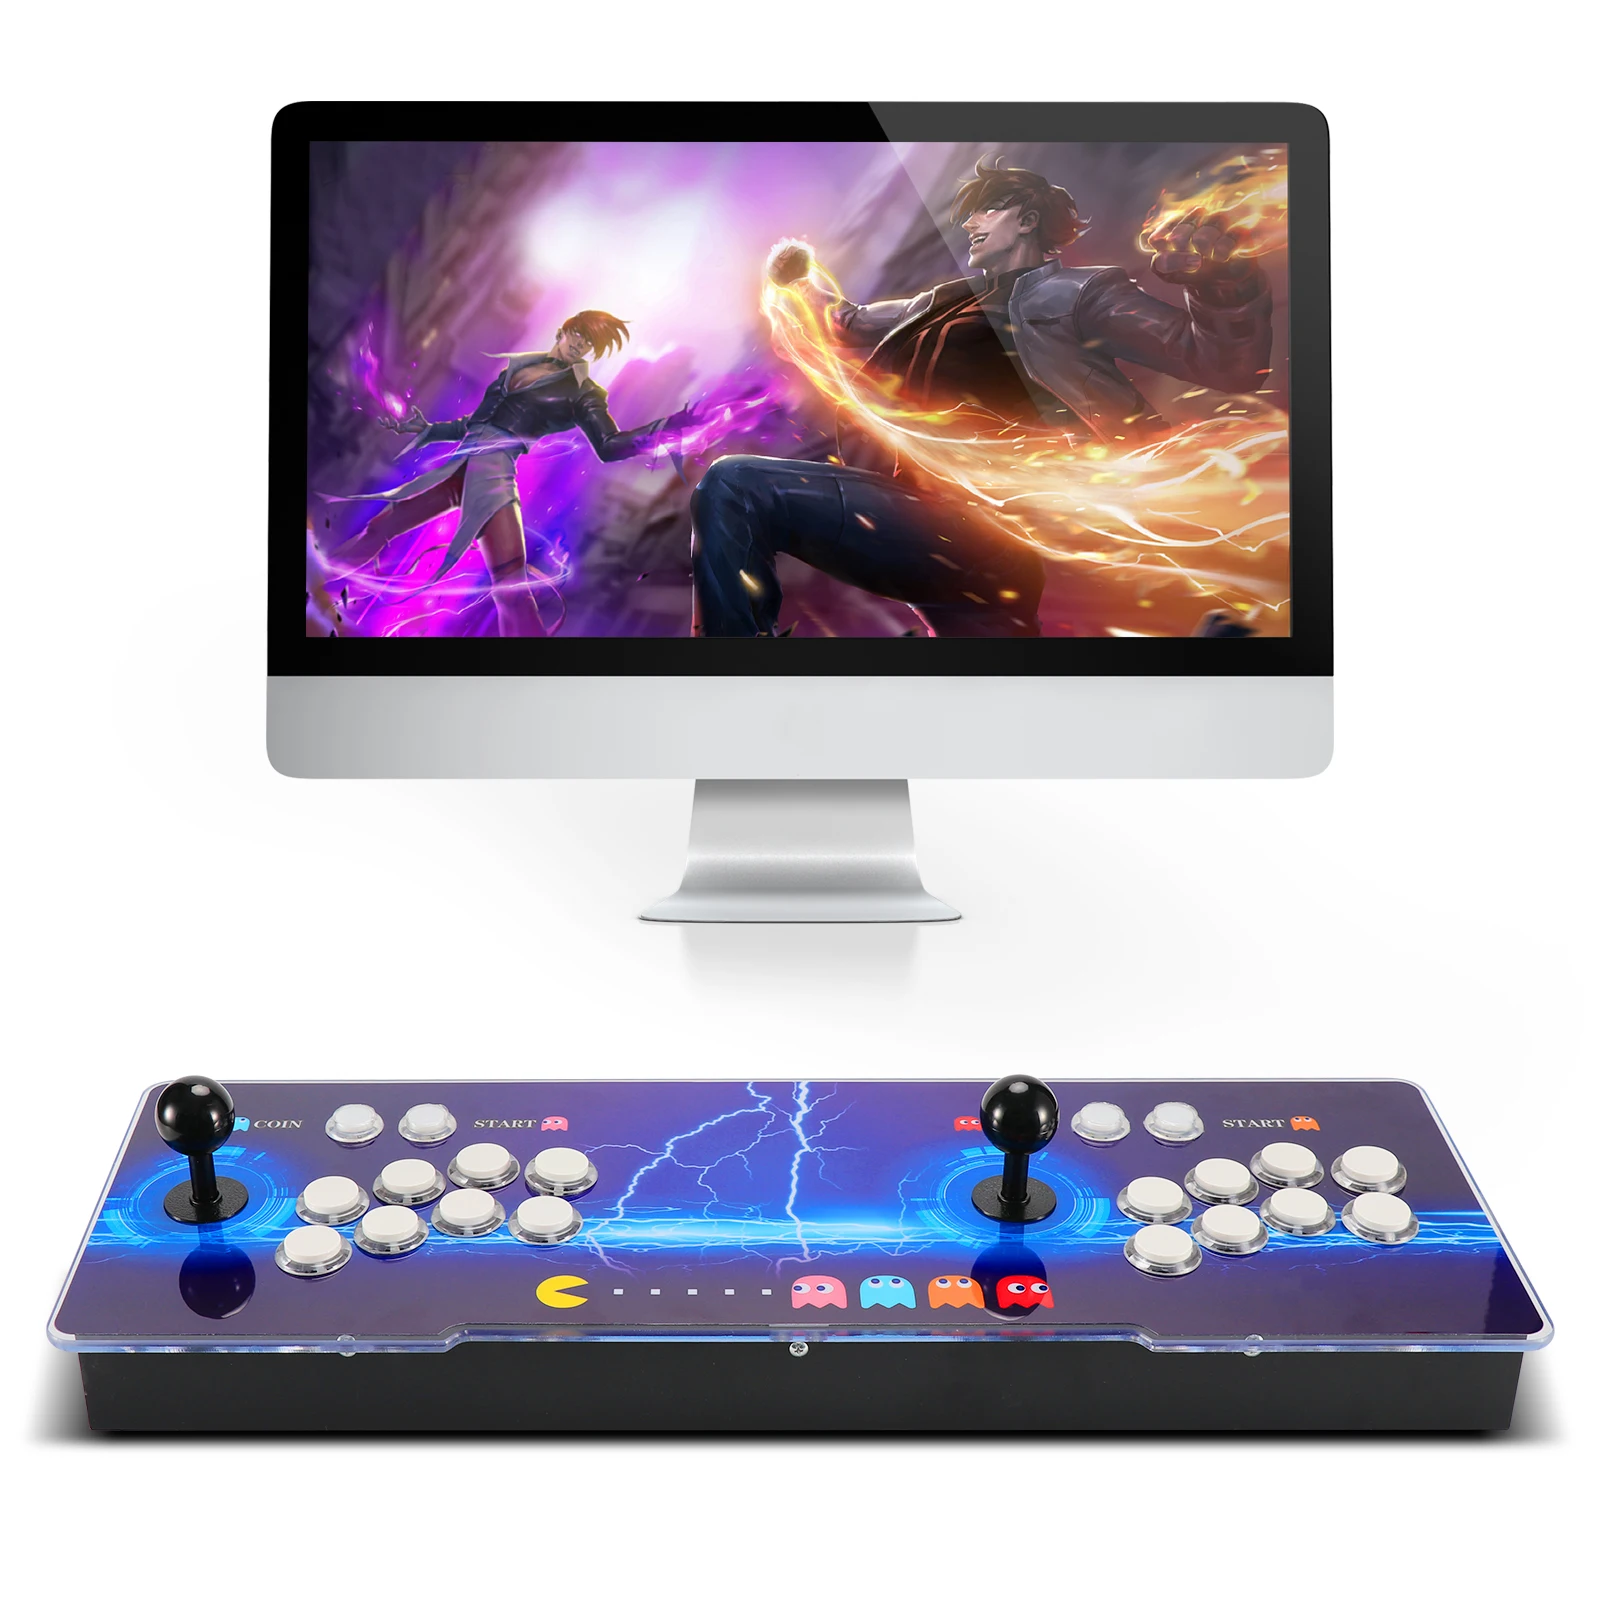 

3D WIFI Pandora game Box 8000 in 1 Save Function Multiplayer Joysticks Retro Arcade Game Console Cabinet Support 4 Players